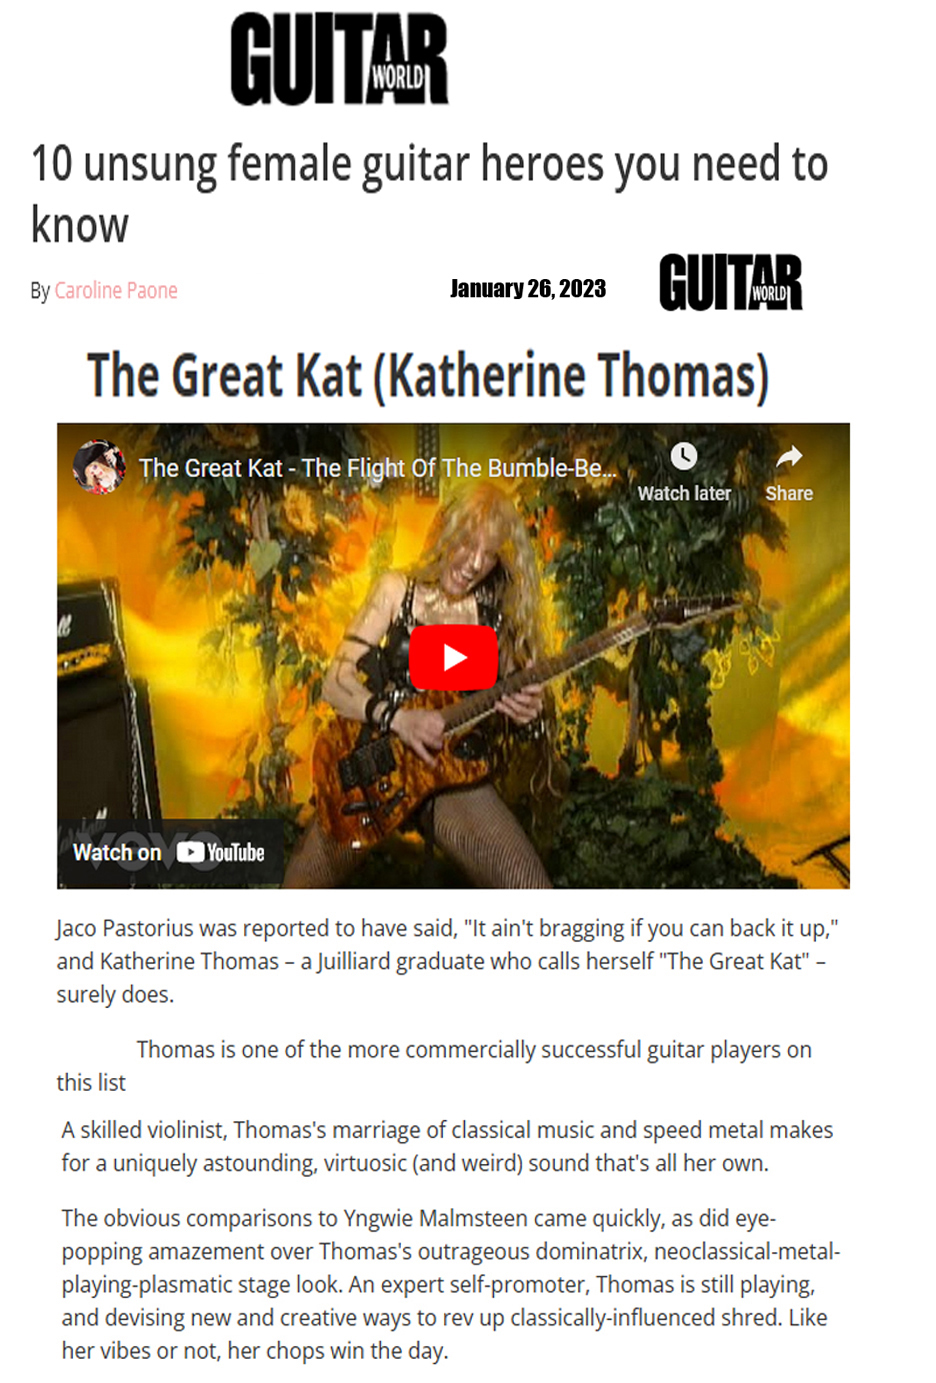 Guitar World's "10 Unsung Female Guitar Heroes You Need To Know" Features The Great Kat: "Uniquely astounding, virtuosic sound" By Caroline Paone